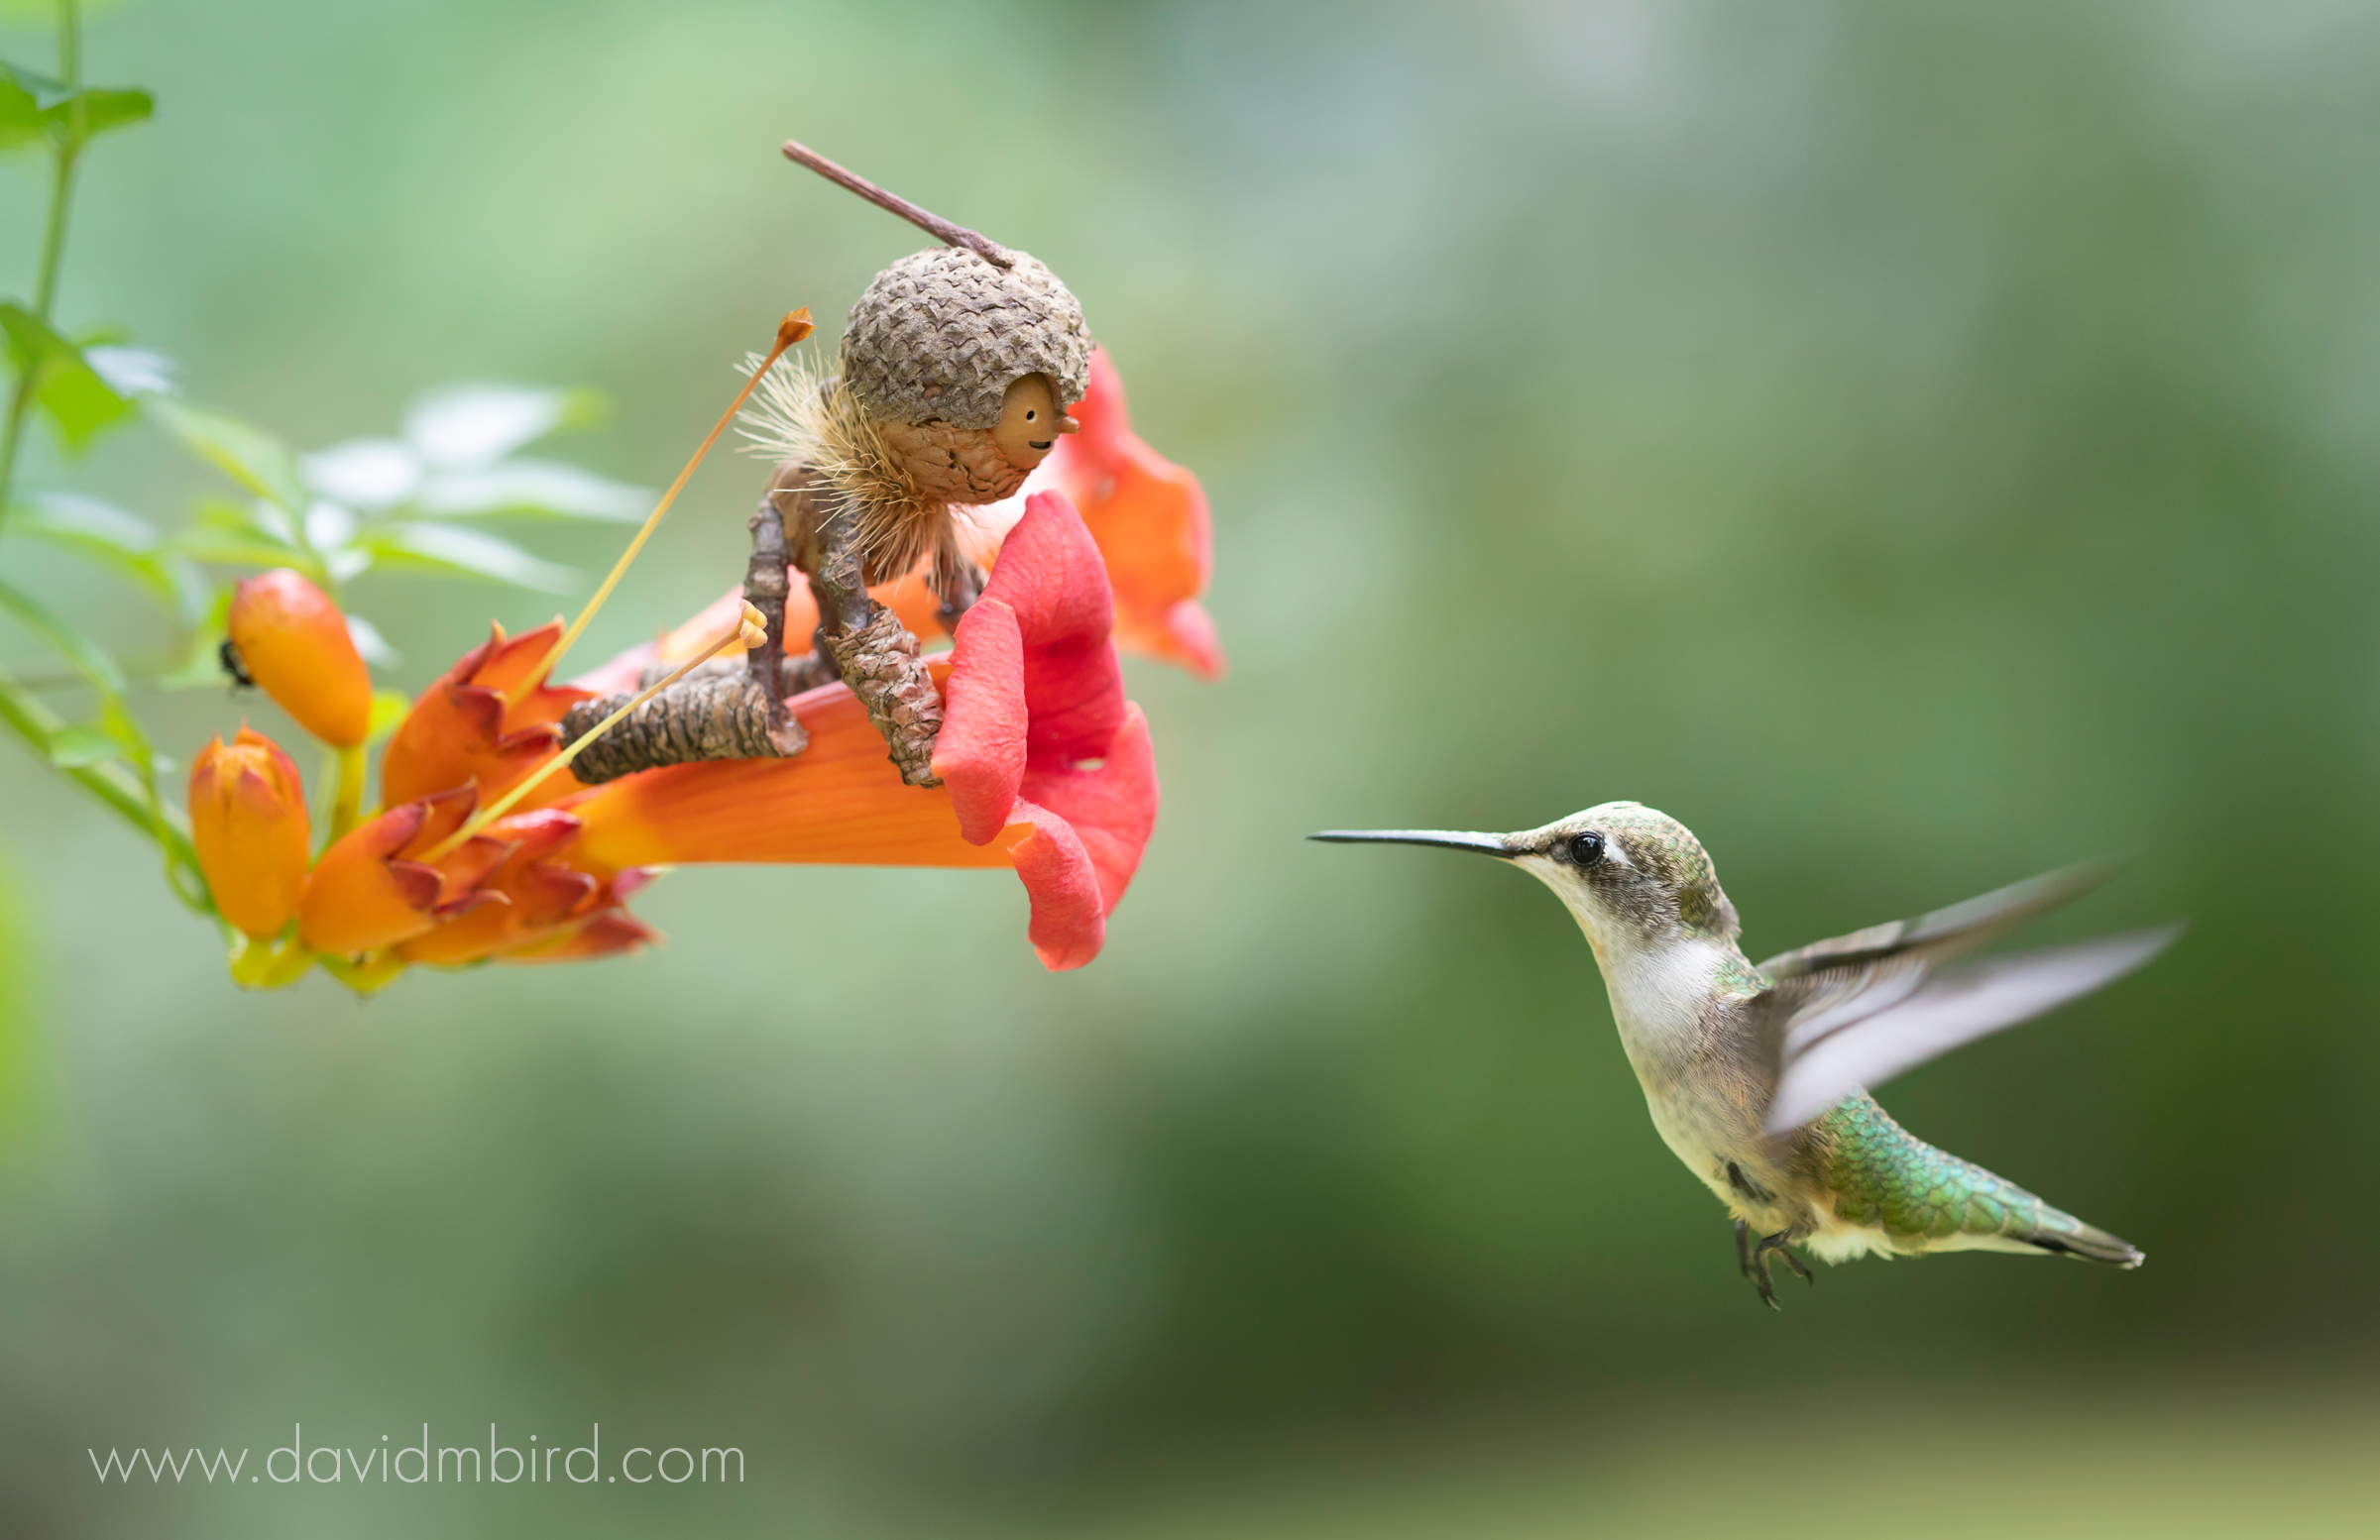 Small acorn person waits on trumpet flower as it approached by a hummingbird 